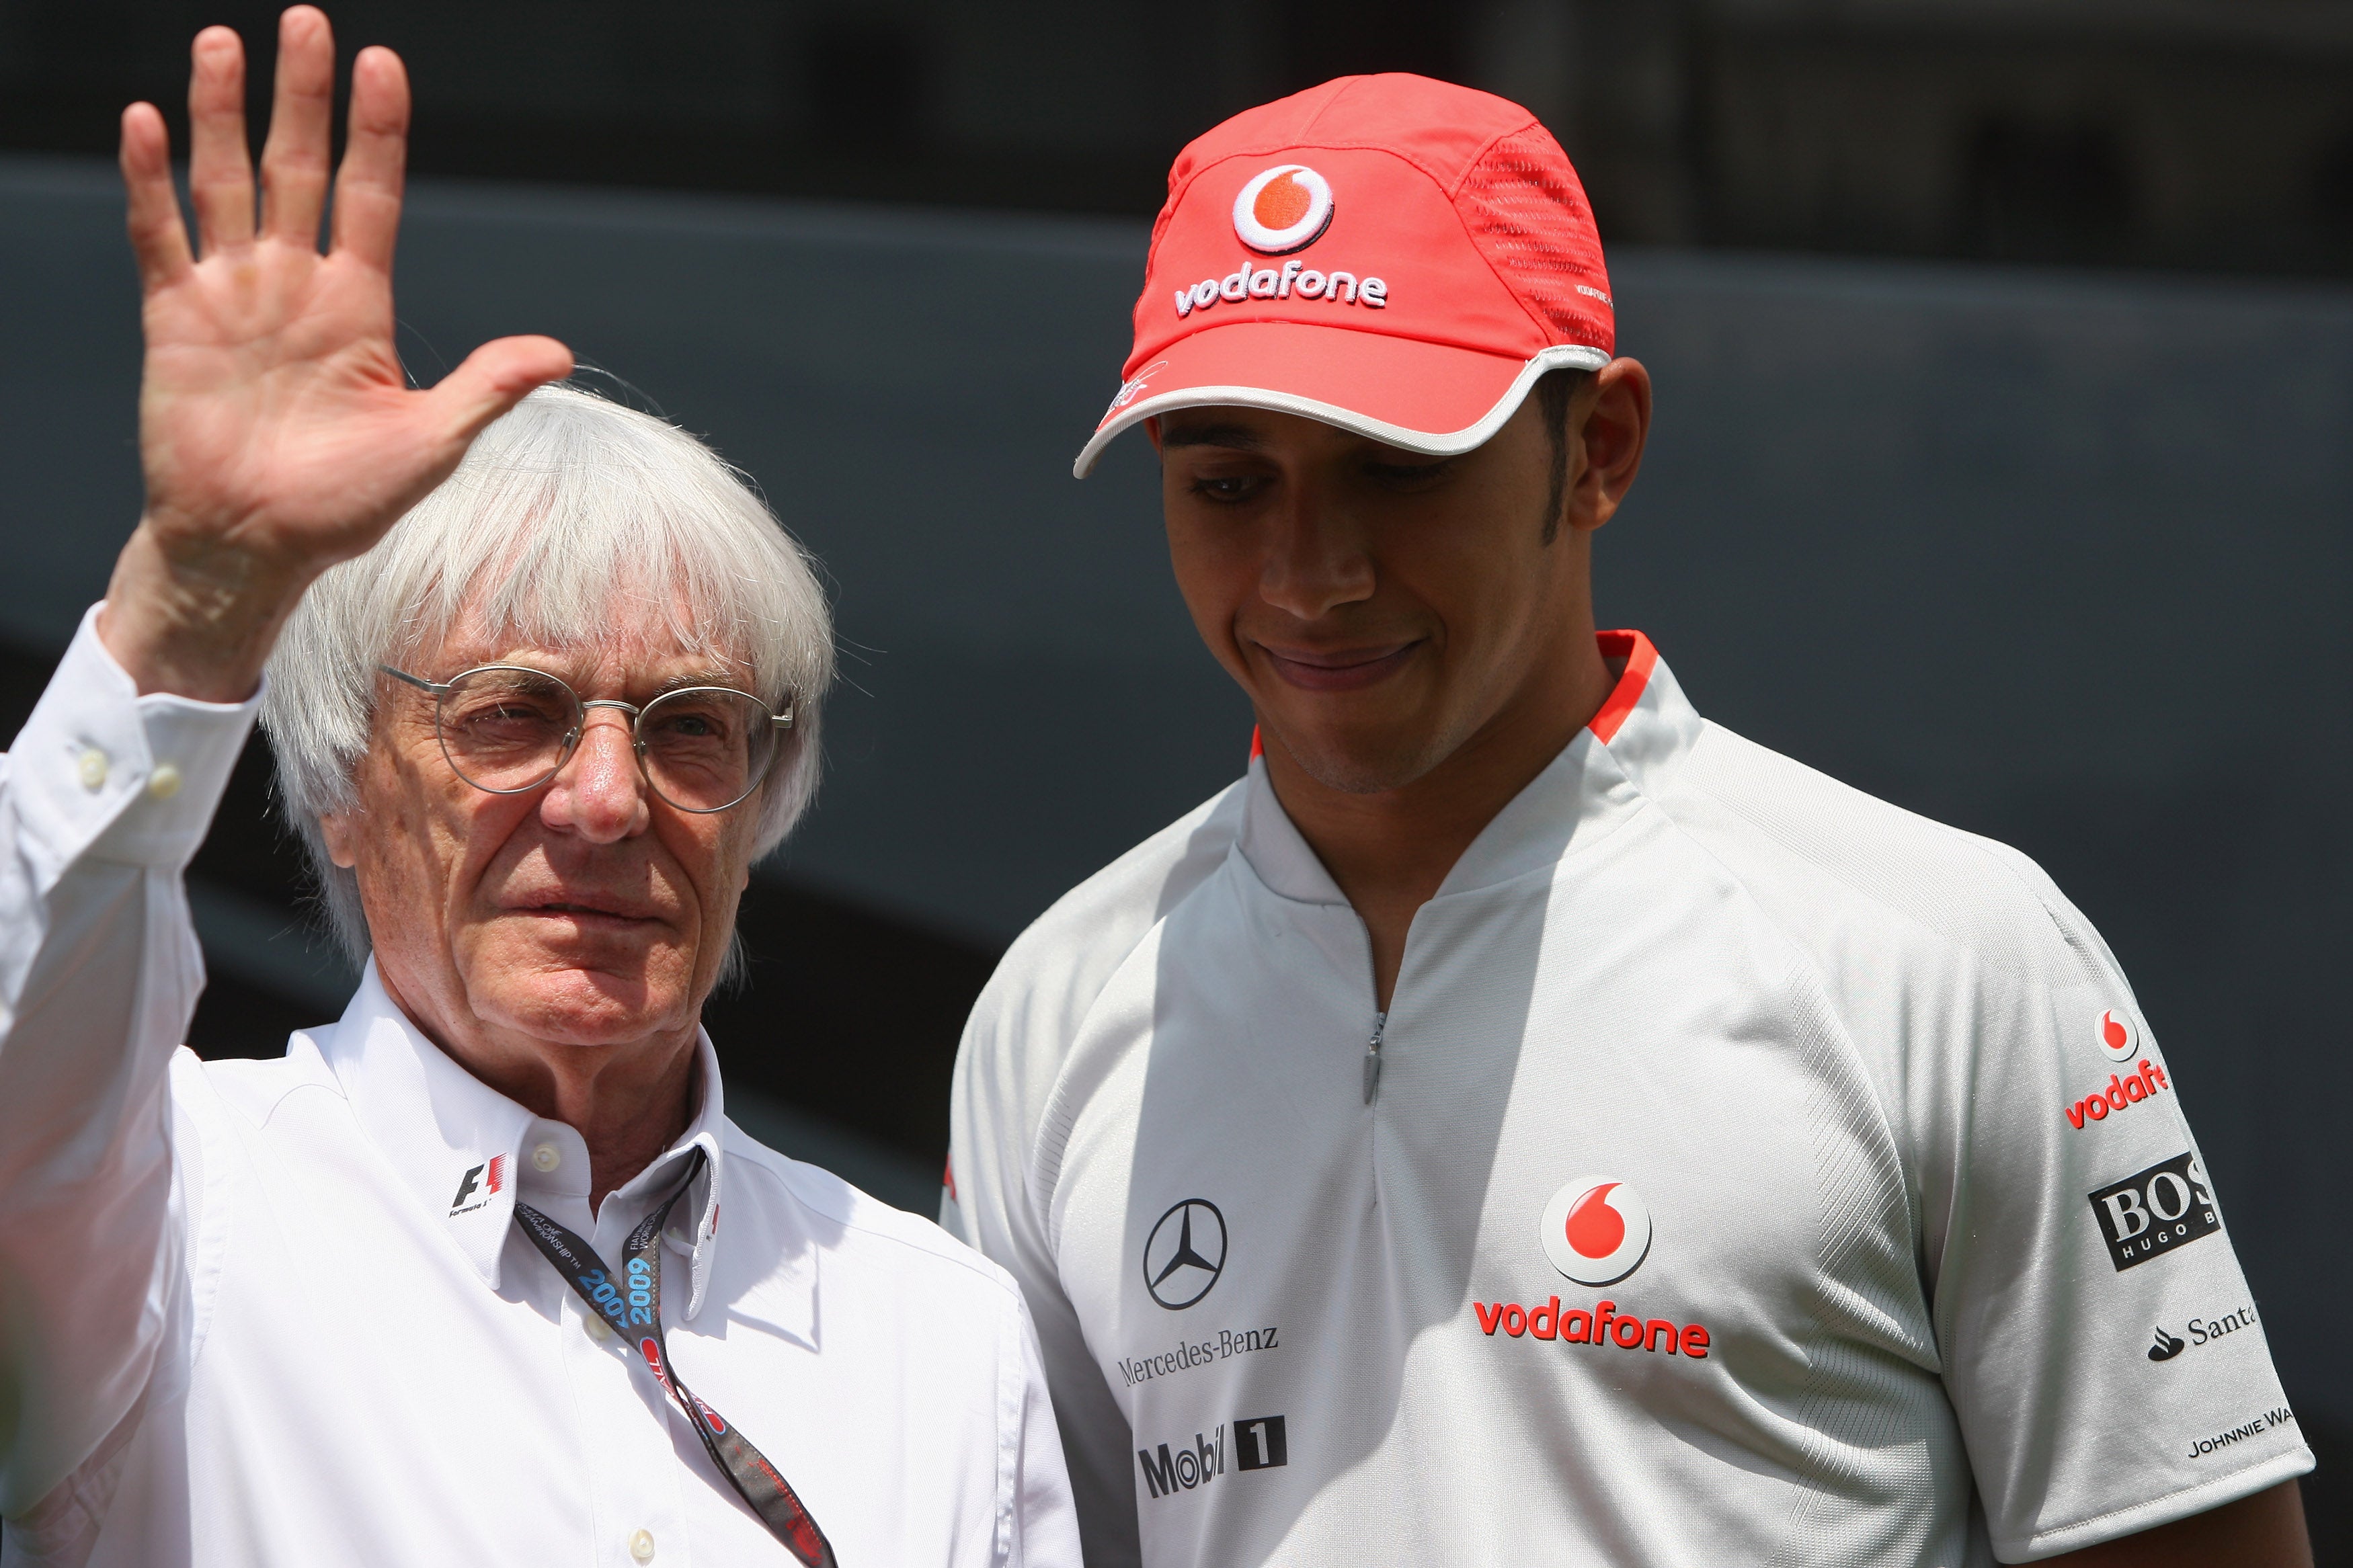 Bernie Ecclestone (left) admitted that he knew what happened with Crashgate before it was made public